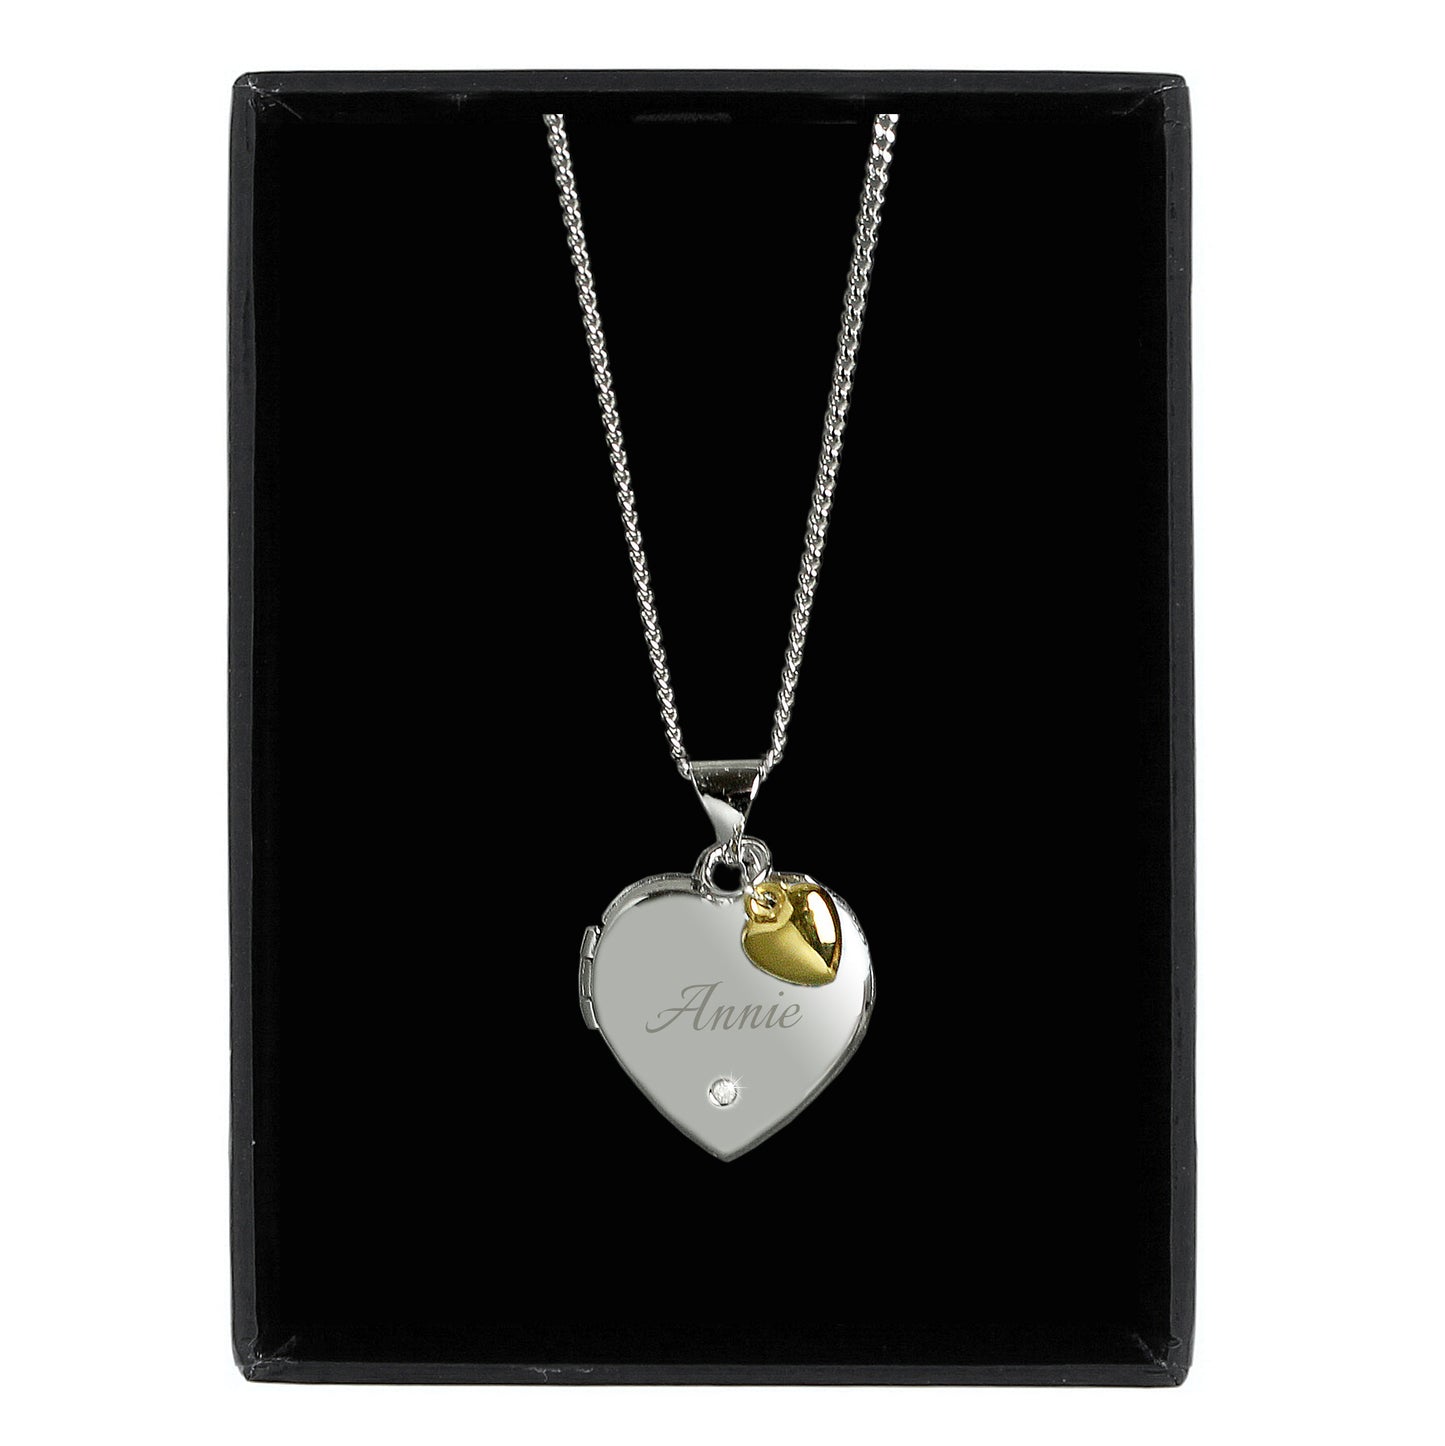 Personalised Sterling Silver Heart Locket Necklace Diamond 9ct Gold Charm